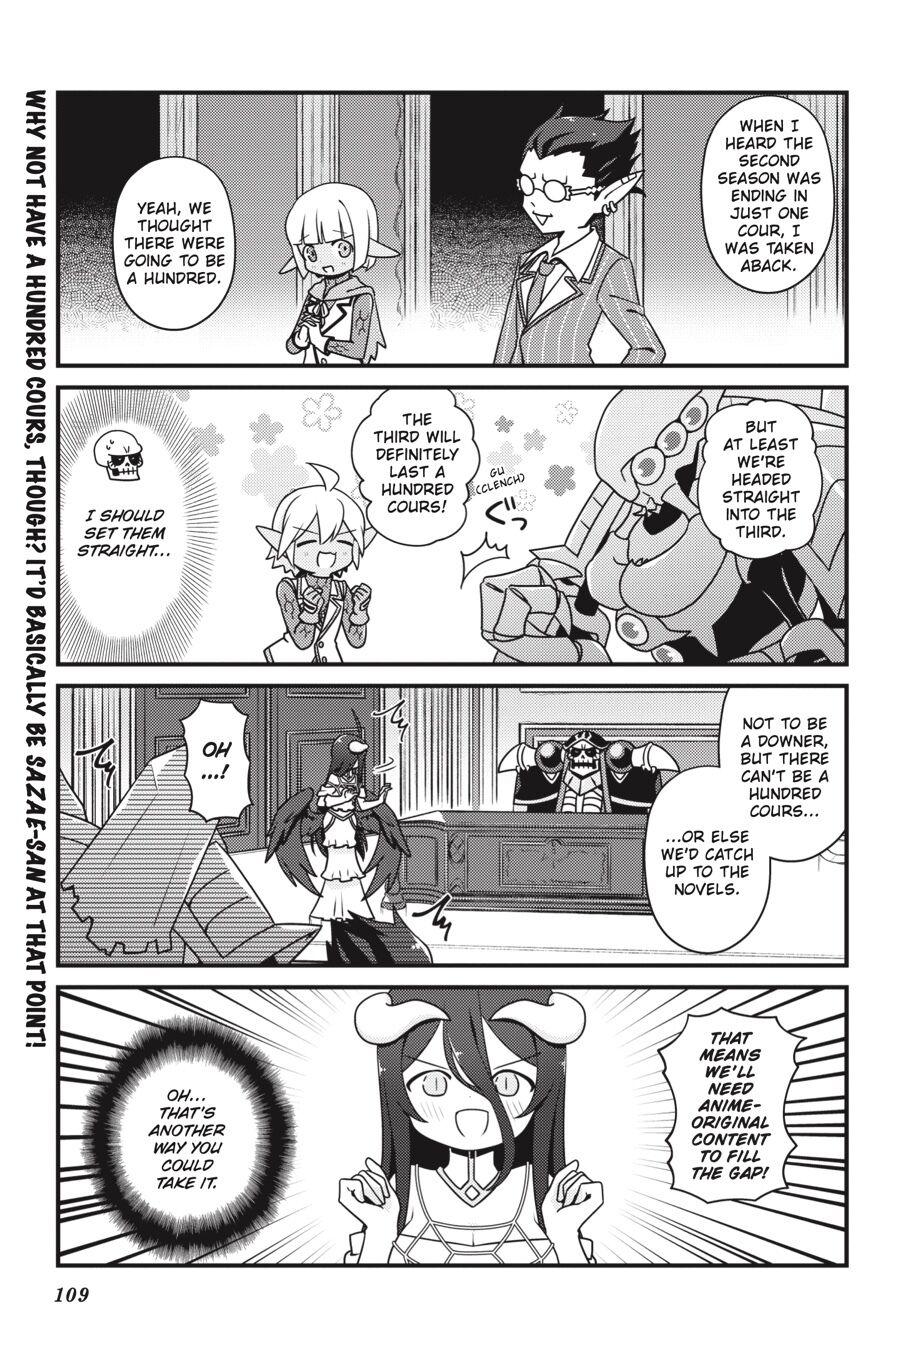 Overlord The Undead King Oh! - Page 3